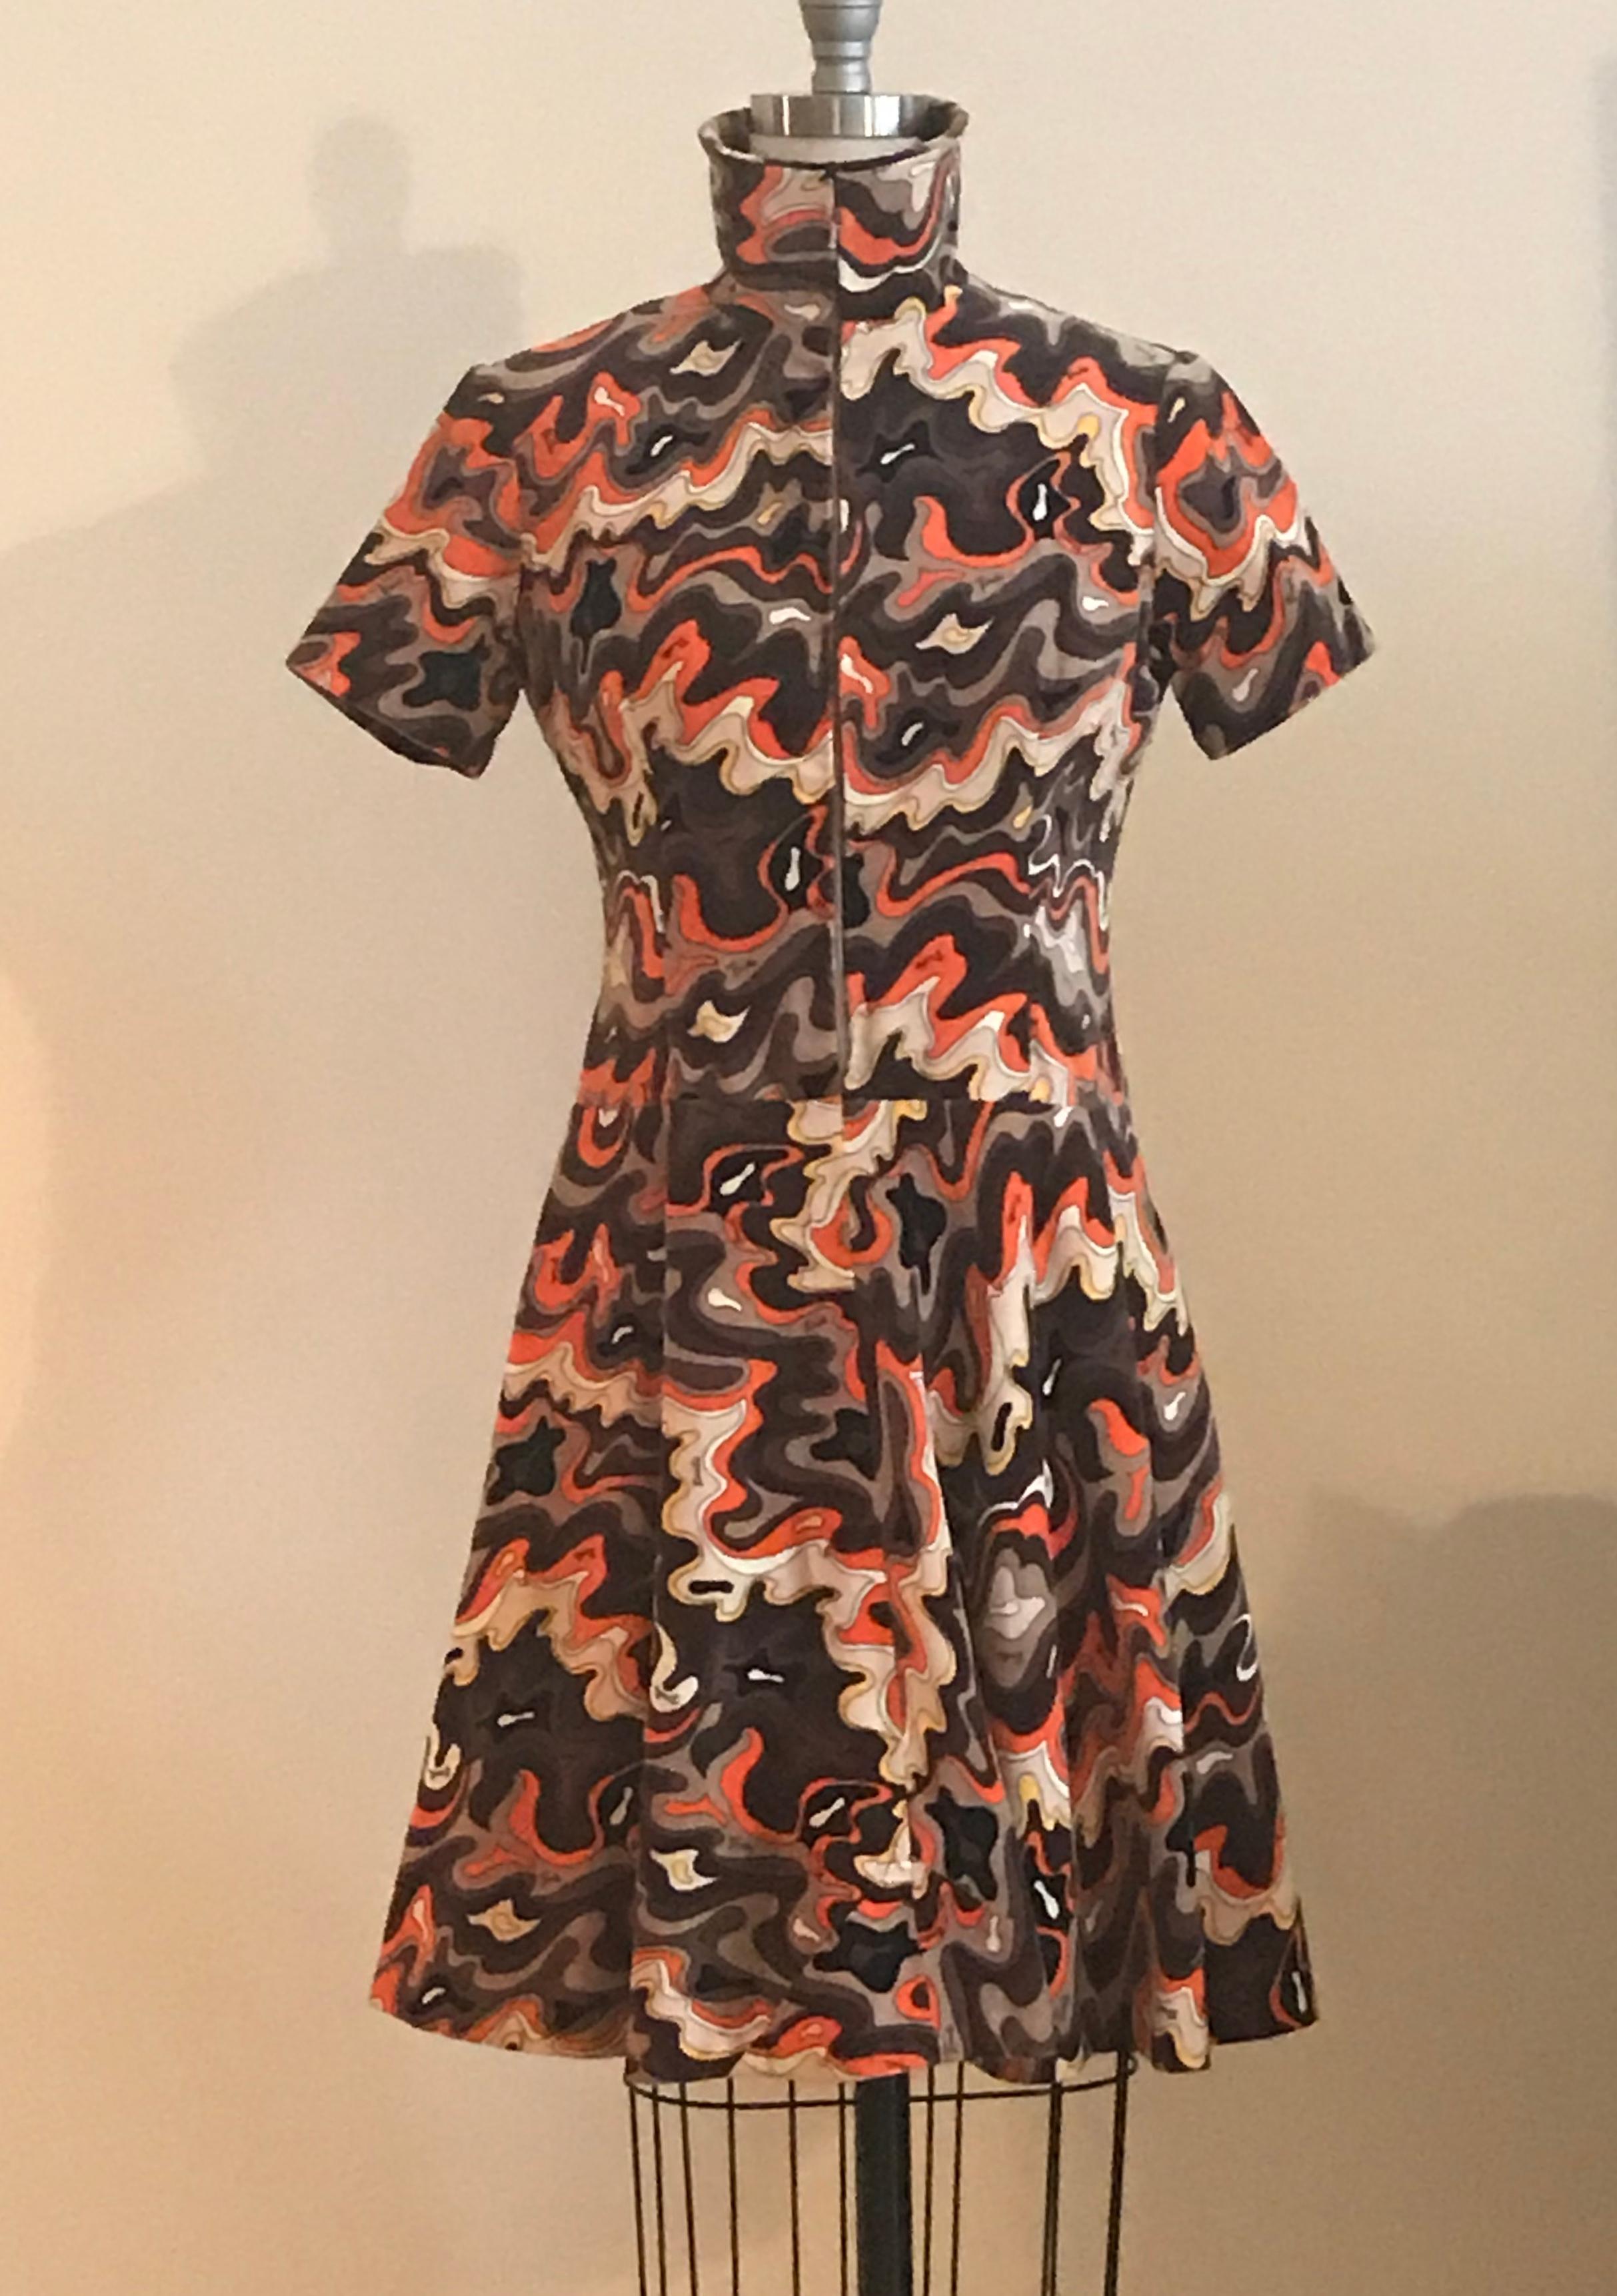 Emilio Pucci for Saks Fifth Avenue 1960s fit and flare velvet dress in orange, brown, and tan signature print. Short sleeves. Zipper closure at front with an amazing collar that can be worn zipped up turtle neck style or unzipped for a basic collar